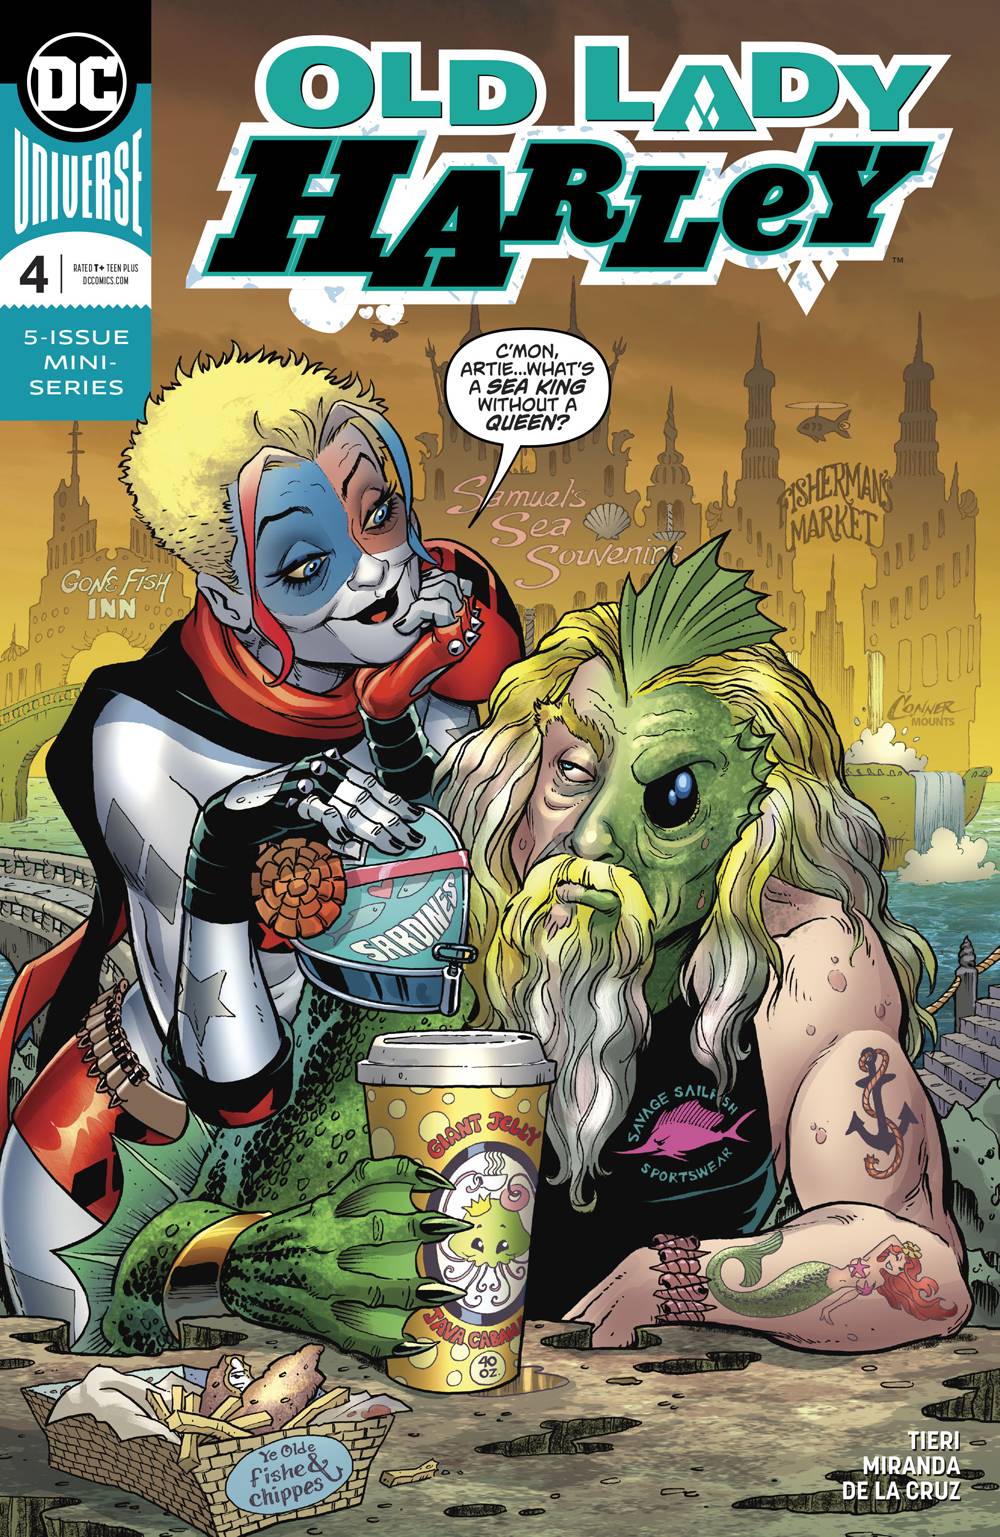 Old Lady Harley #4 (of 5) [2019]